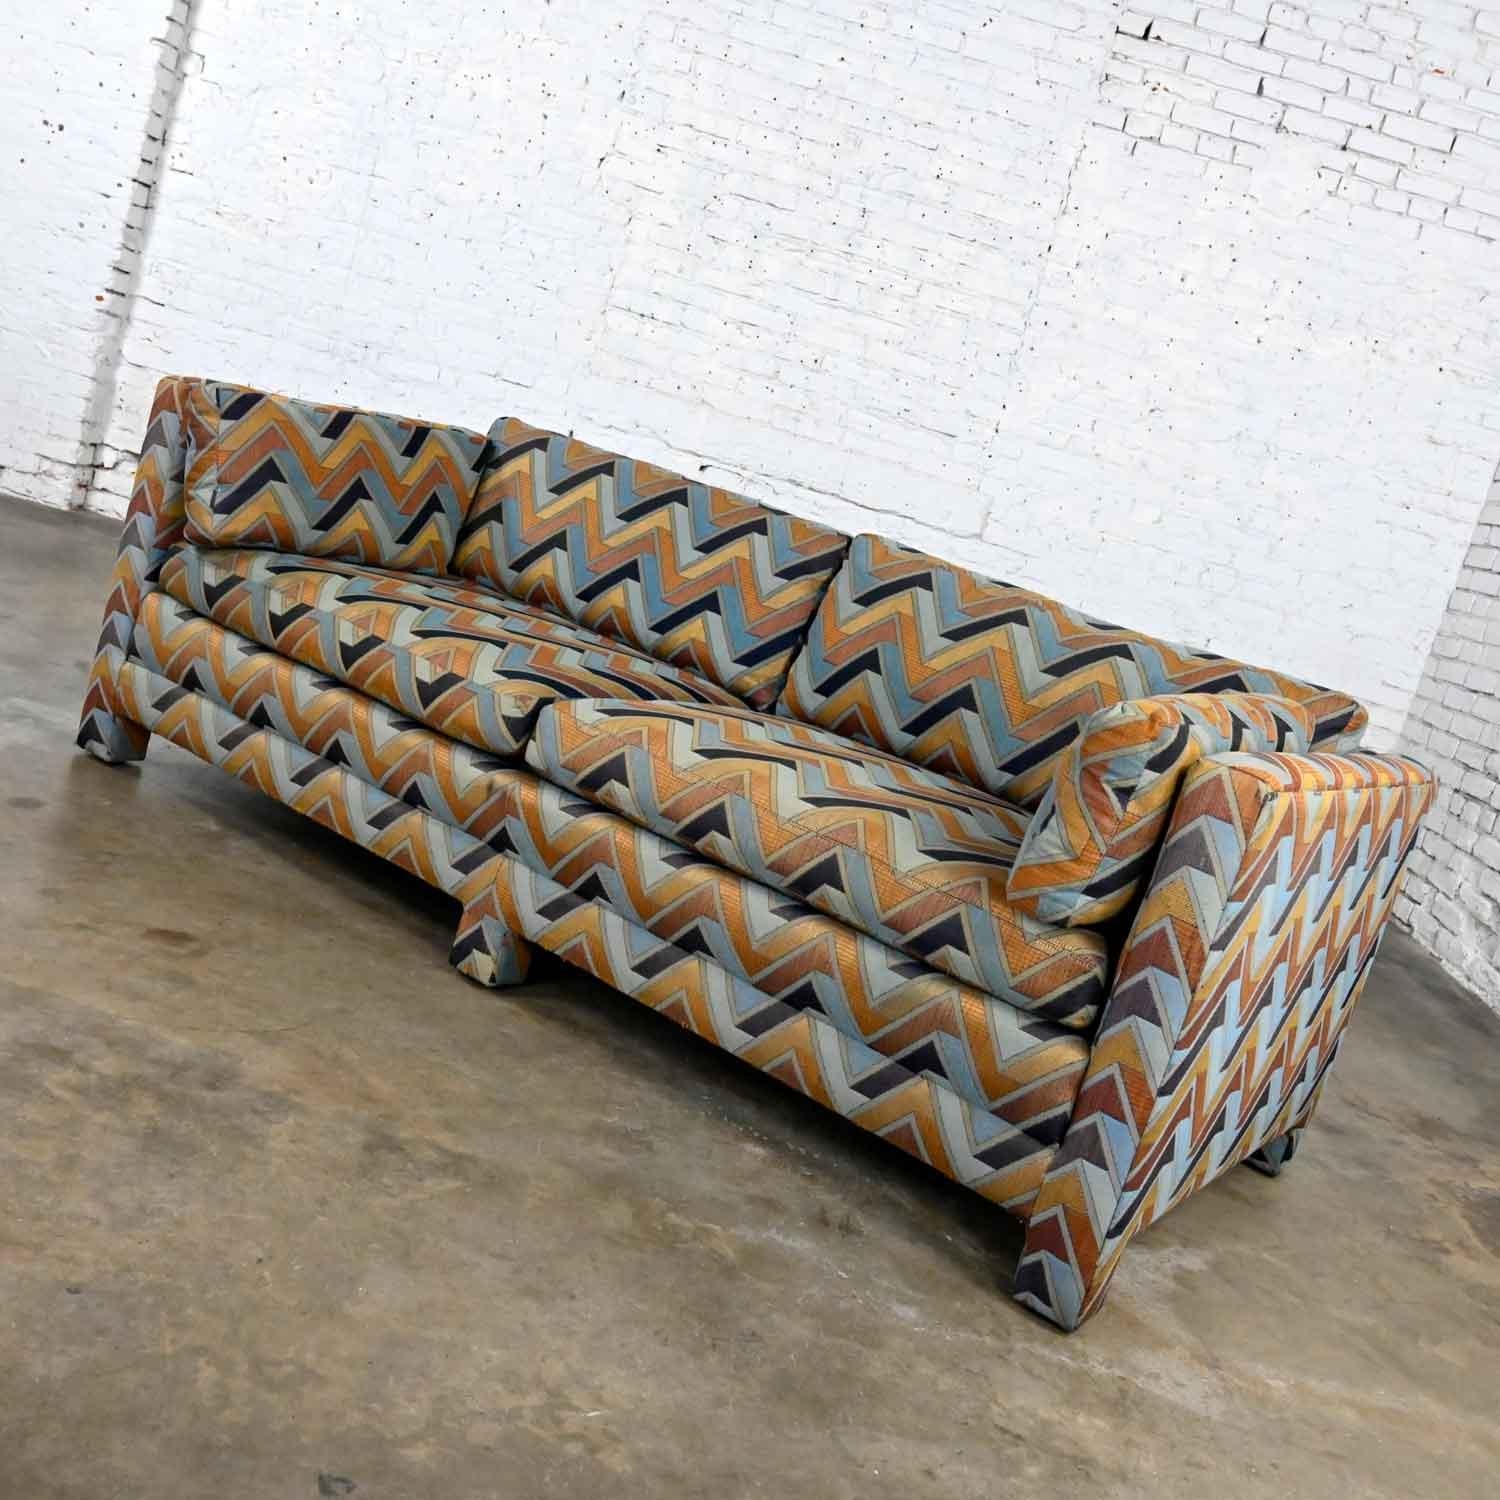 Fabulous MCM (a.k.a.) mid-century modern gray, light blue, navy blue, taupe, gold & rust chevron tuxedo cube sofa with upholstered legs and frame by Henredon style Milo Baughman. Beautiful condition, keeping in mind that this is vintage and not new